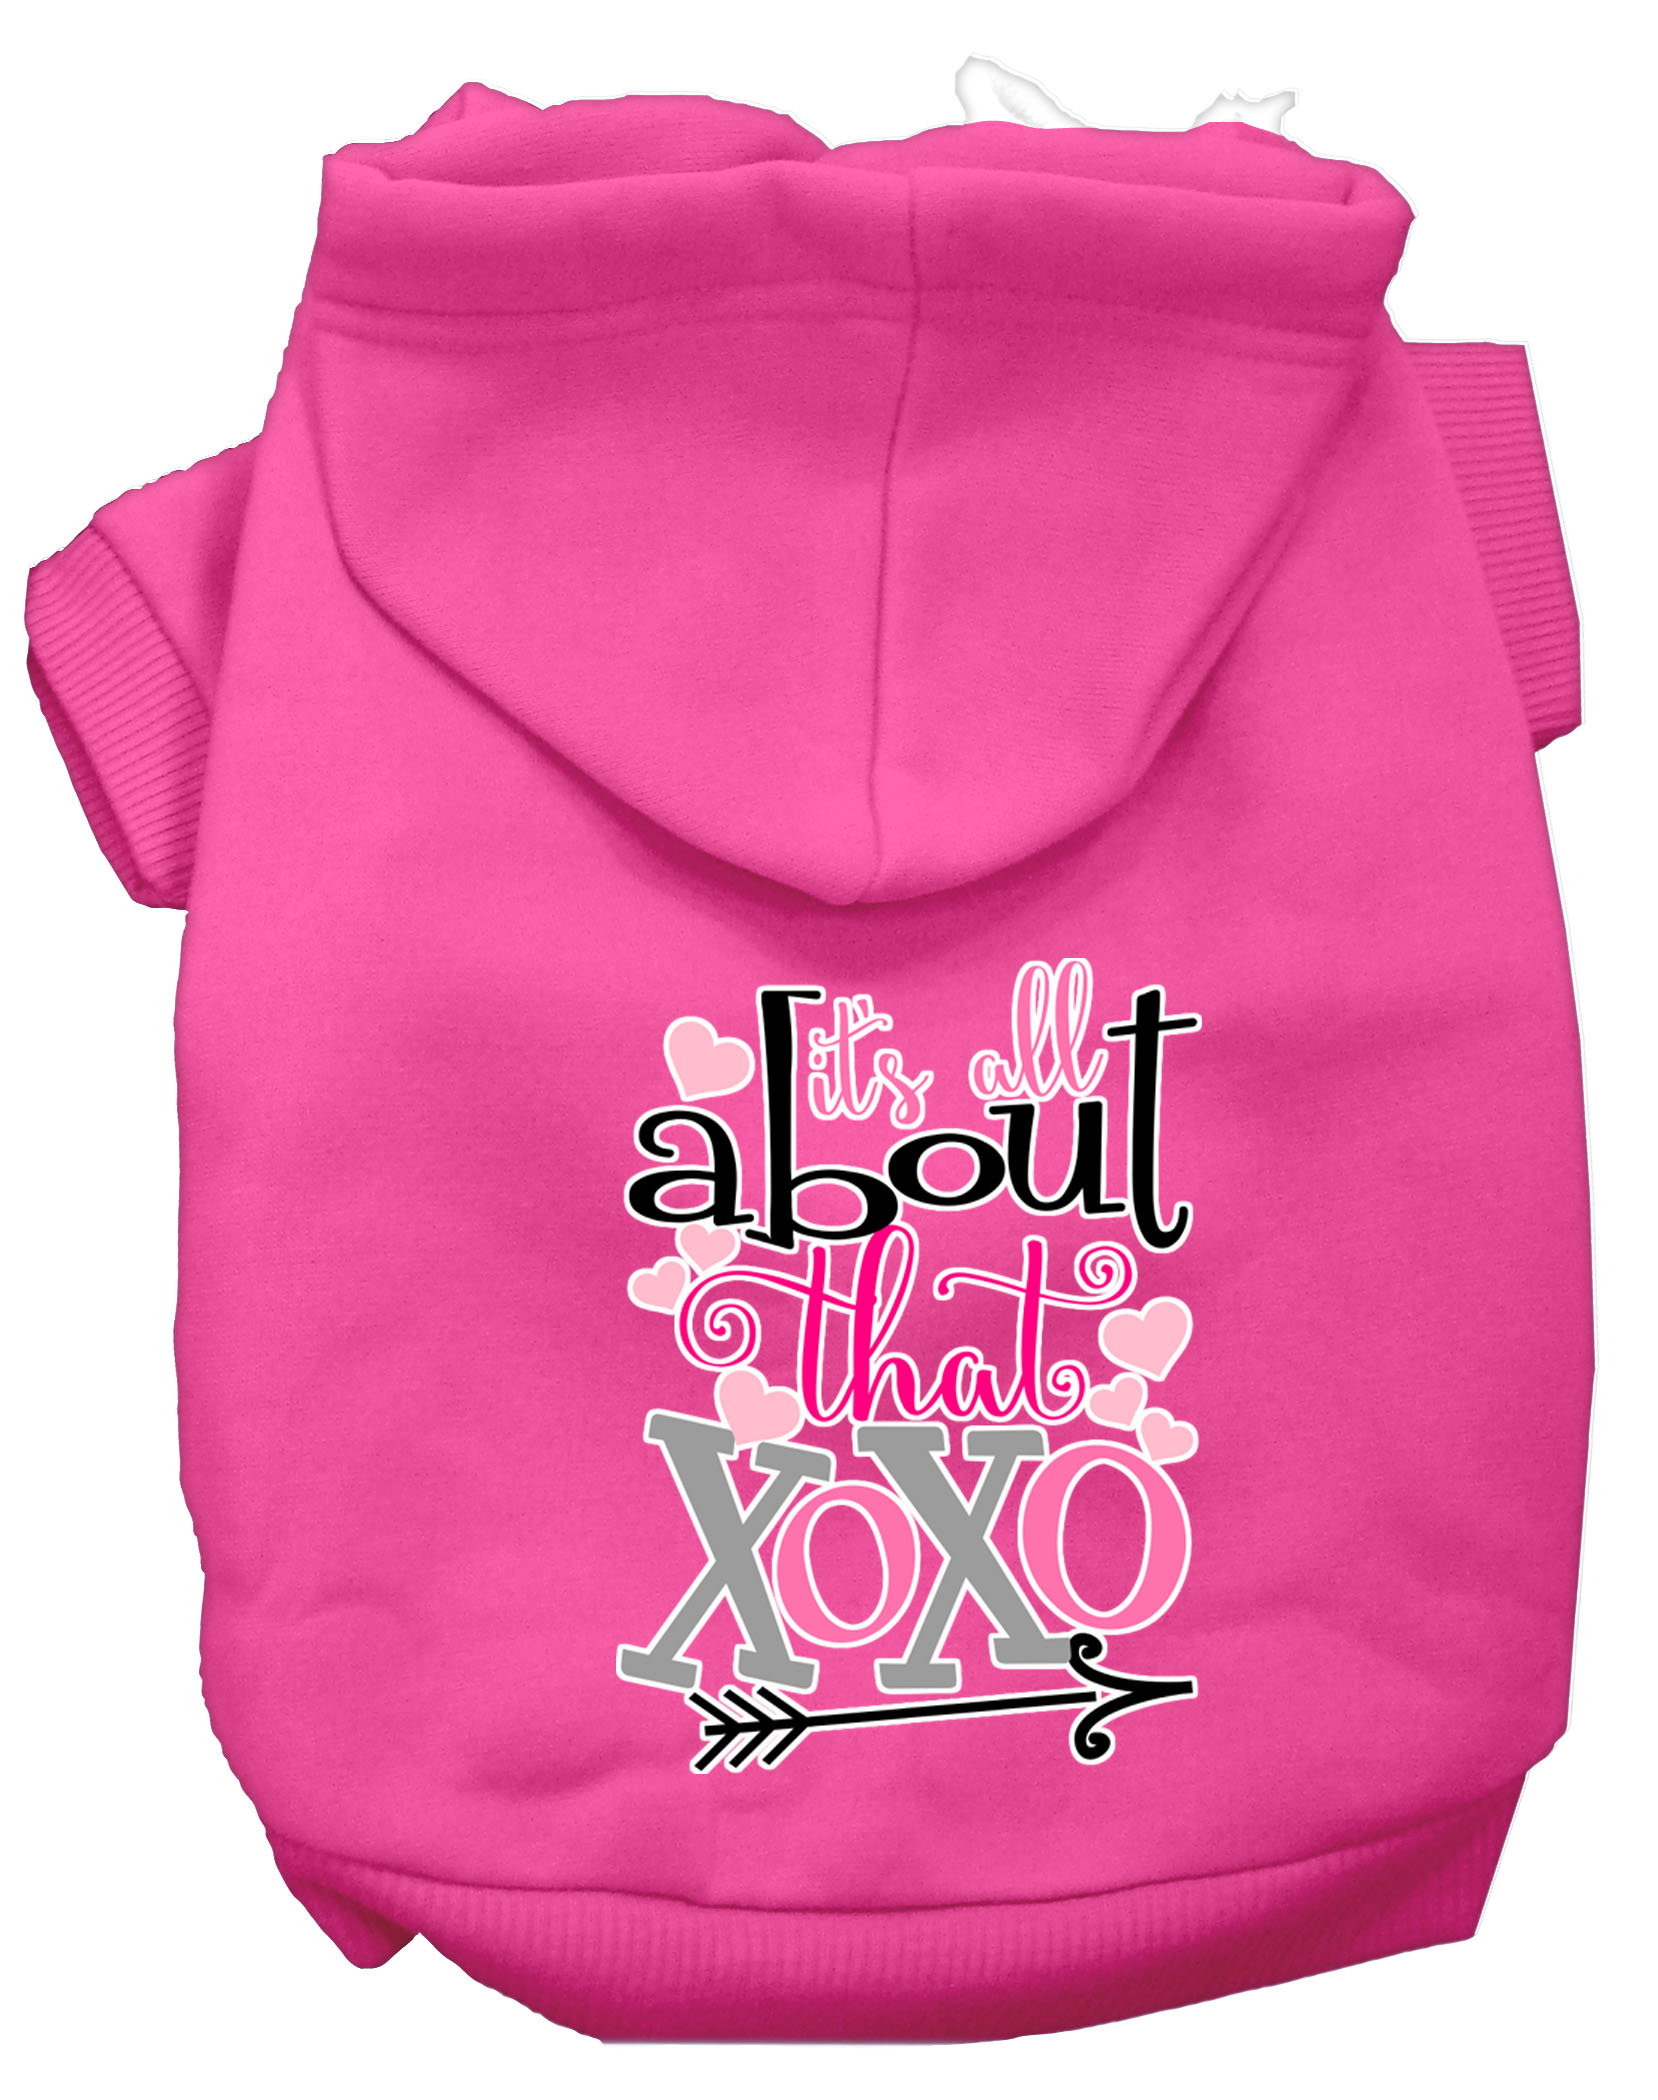 All About that XOXO Screen Print Dog Hoodie Bright Pink M